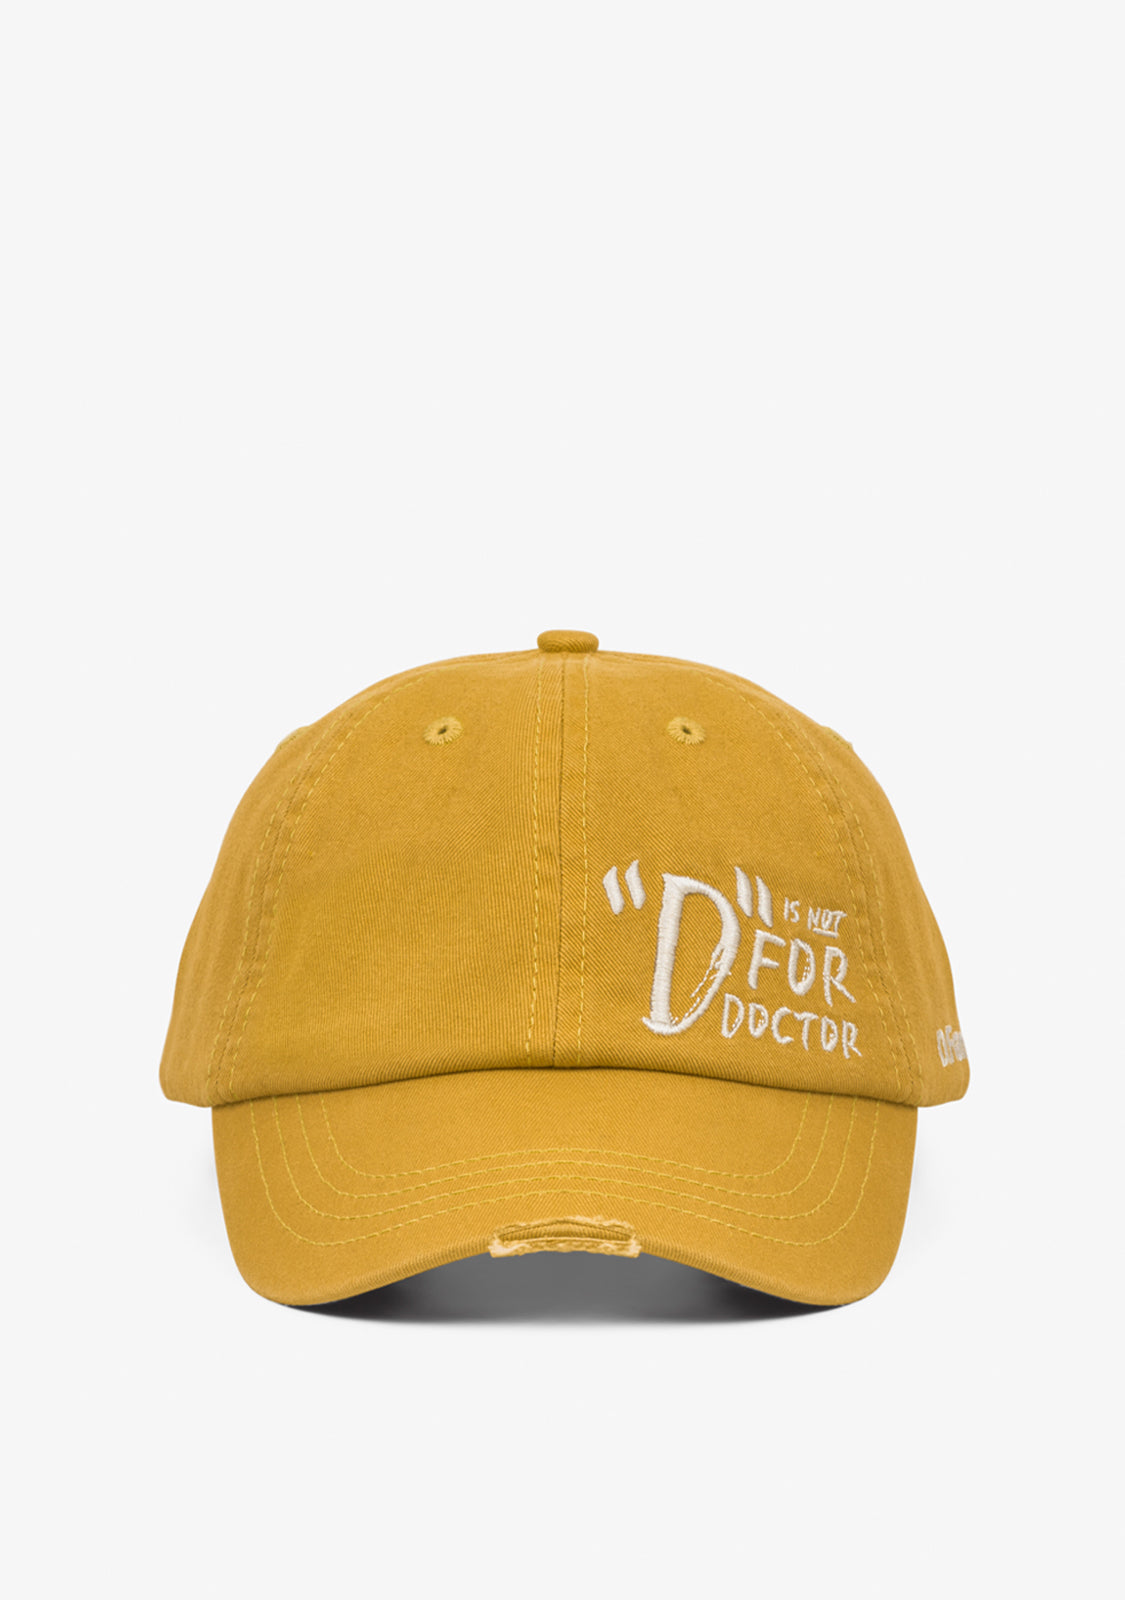 D. is not for Cap Yellow